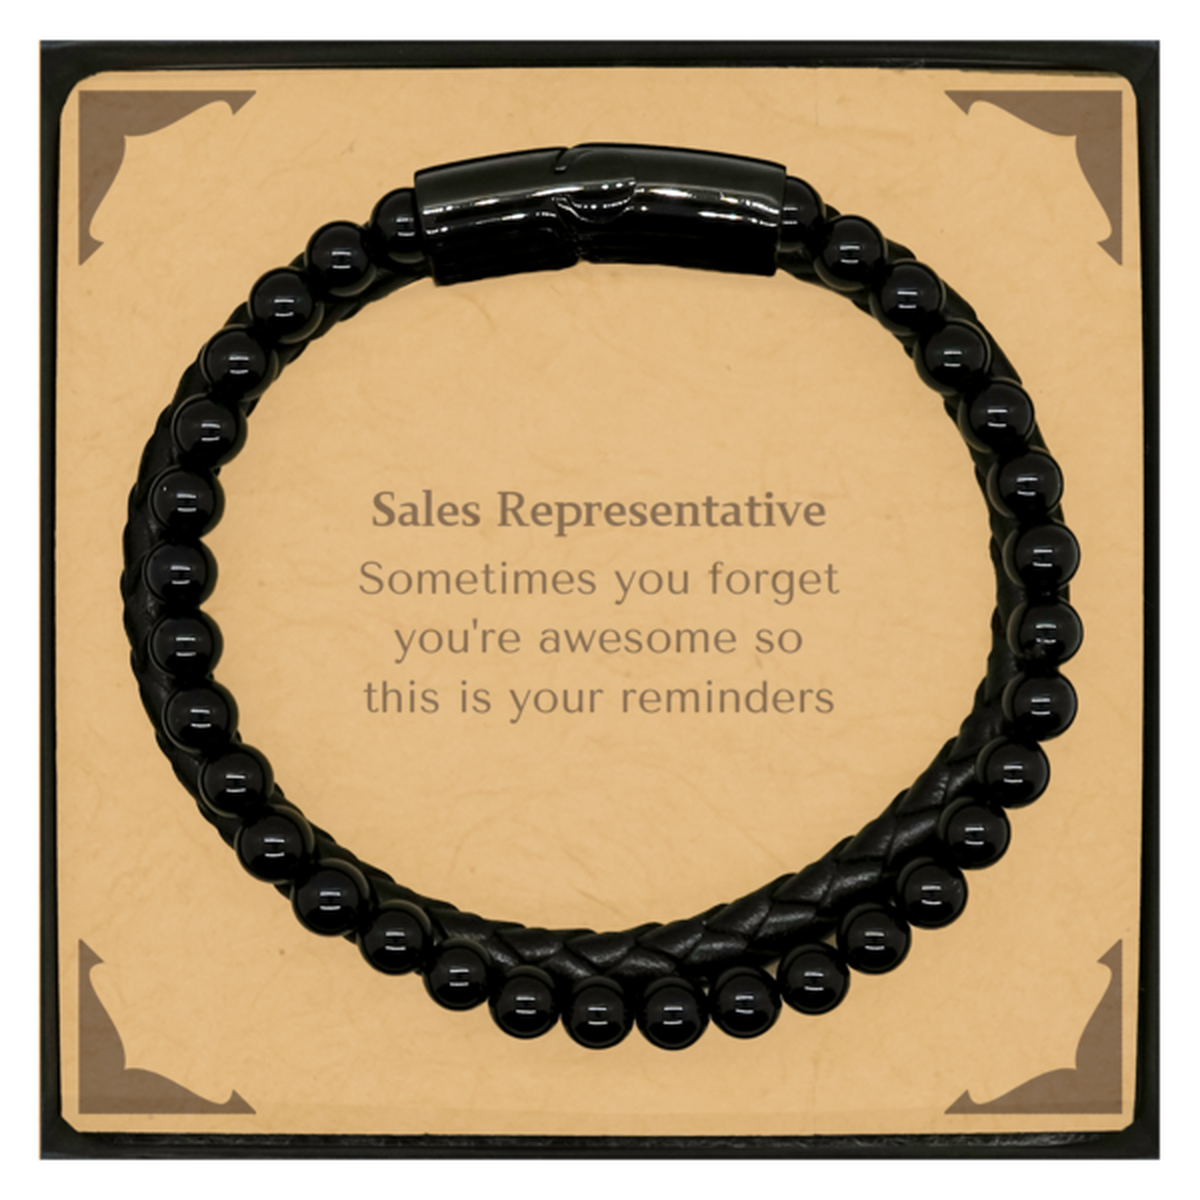 Sentimental Sales Representative Stone Leather Bracelets, Sales Representative Sometimes you forget you're awesome so this is your reminders, Graduation Christmas Birthday Gifts for Sales Representative, Men, Women, Coworkers